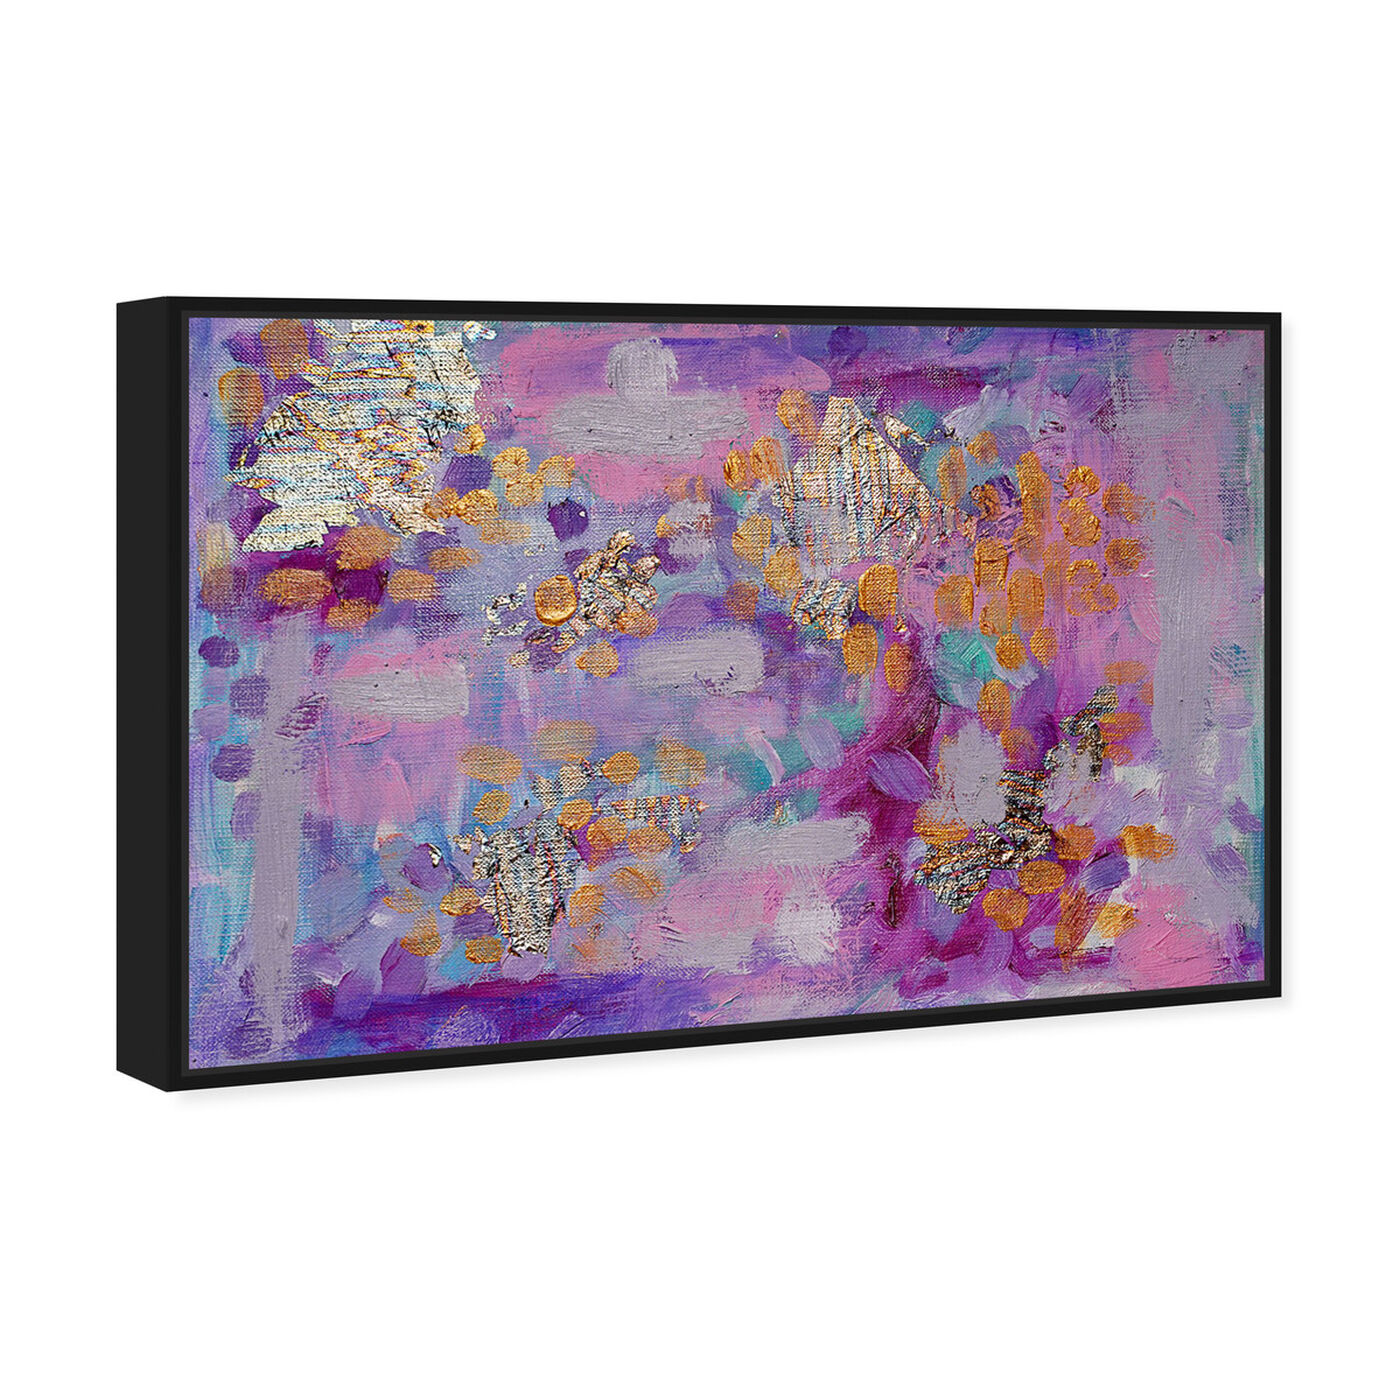 Angled view of The Mystic by Tiffany Pratt featuring abstract and paint art.